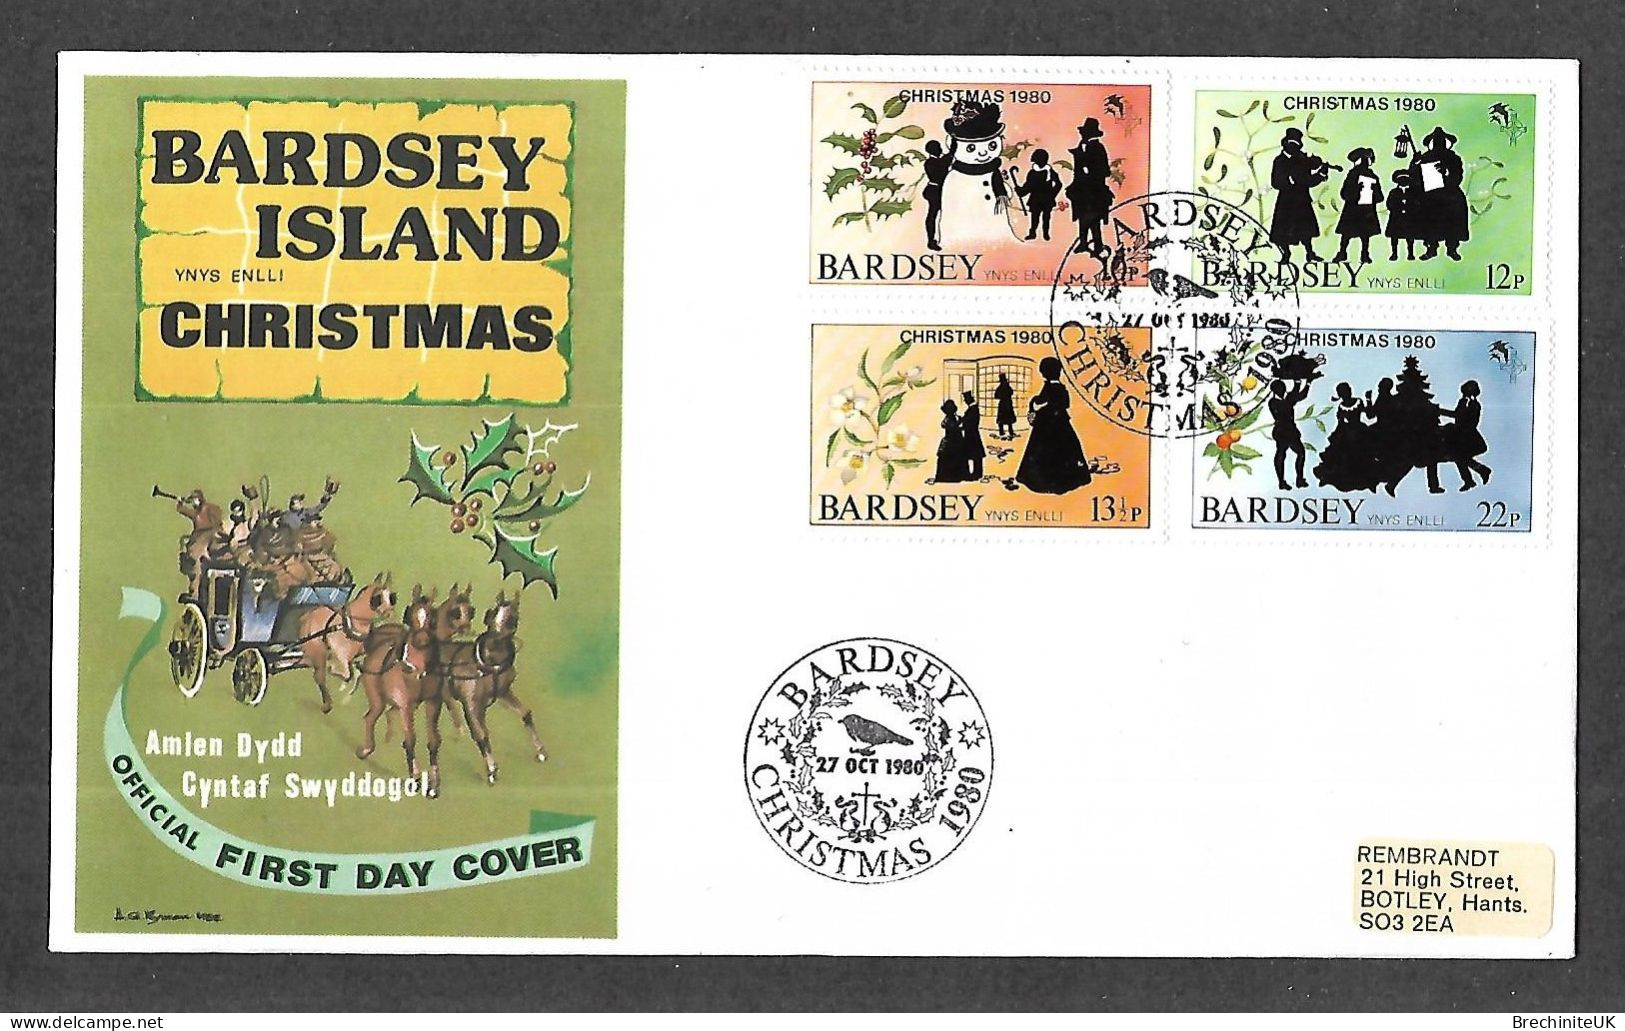 (N577) Great Britain BARDSEY ISLAND, 1980 Christmas Stamp FDC - Local Issues